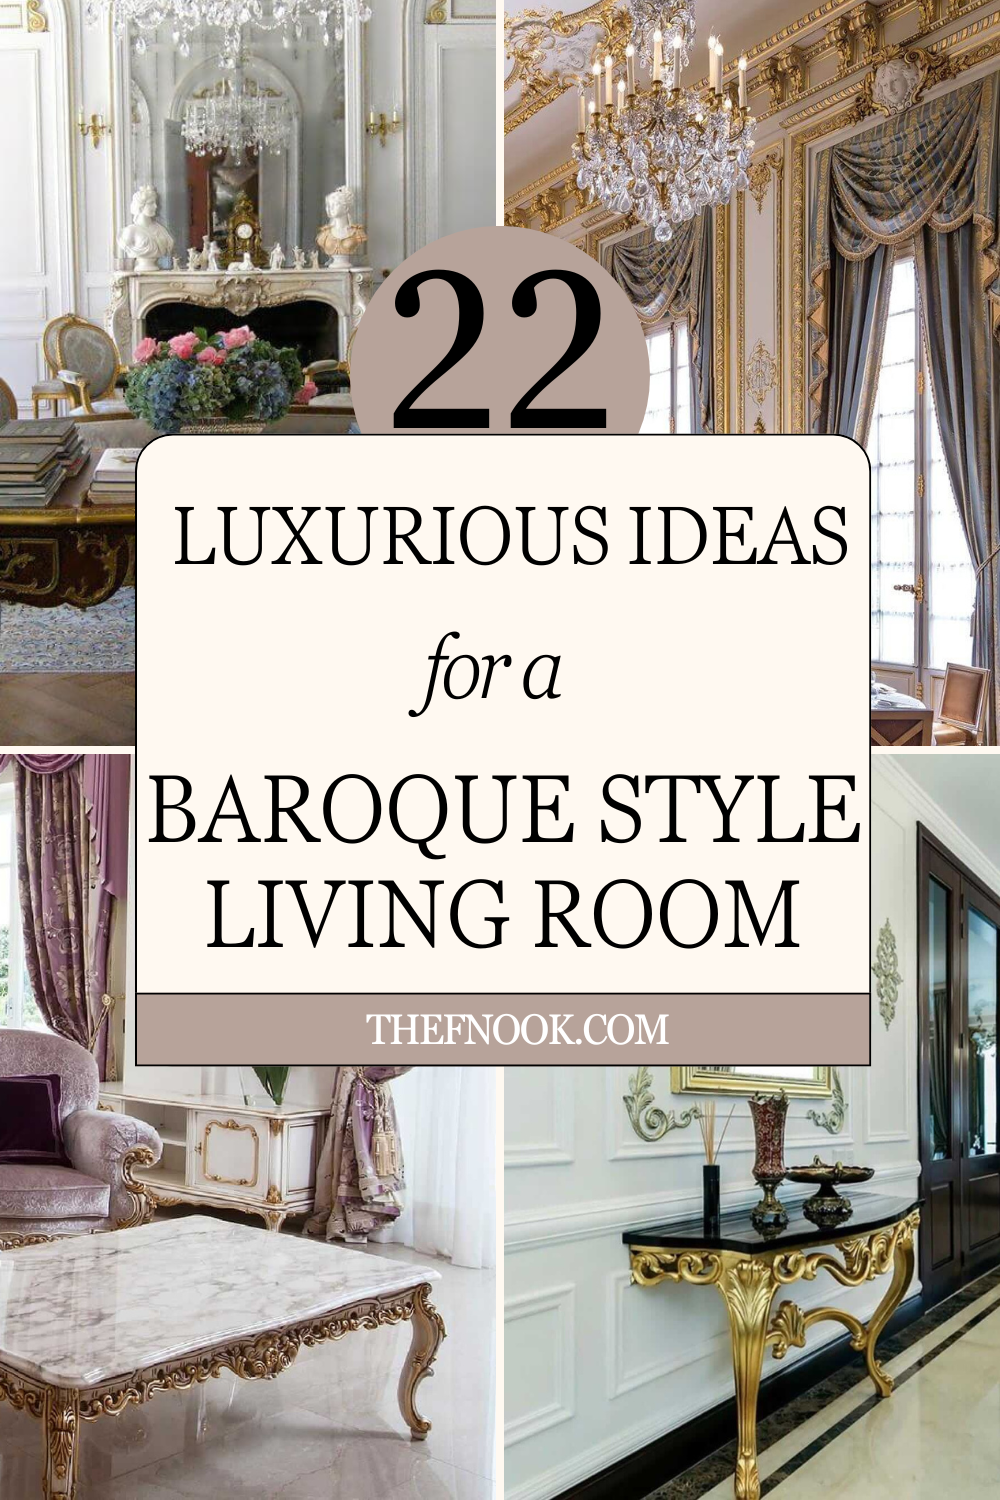 22 Luxurious Ideas for a Baroque Aesthetic Living Room